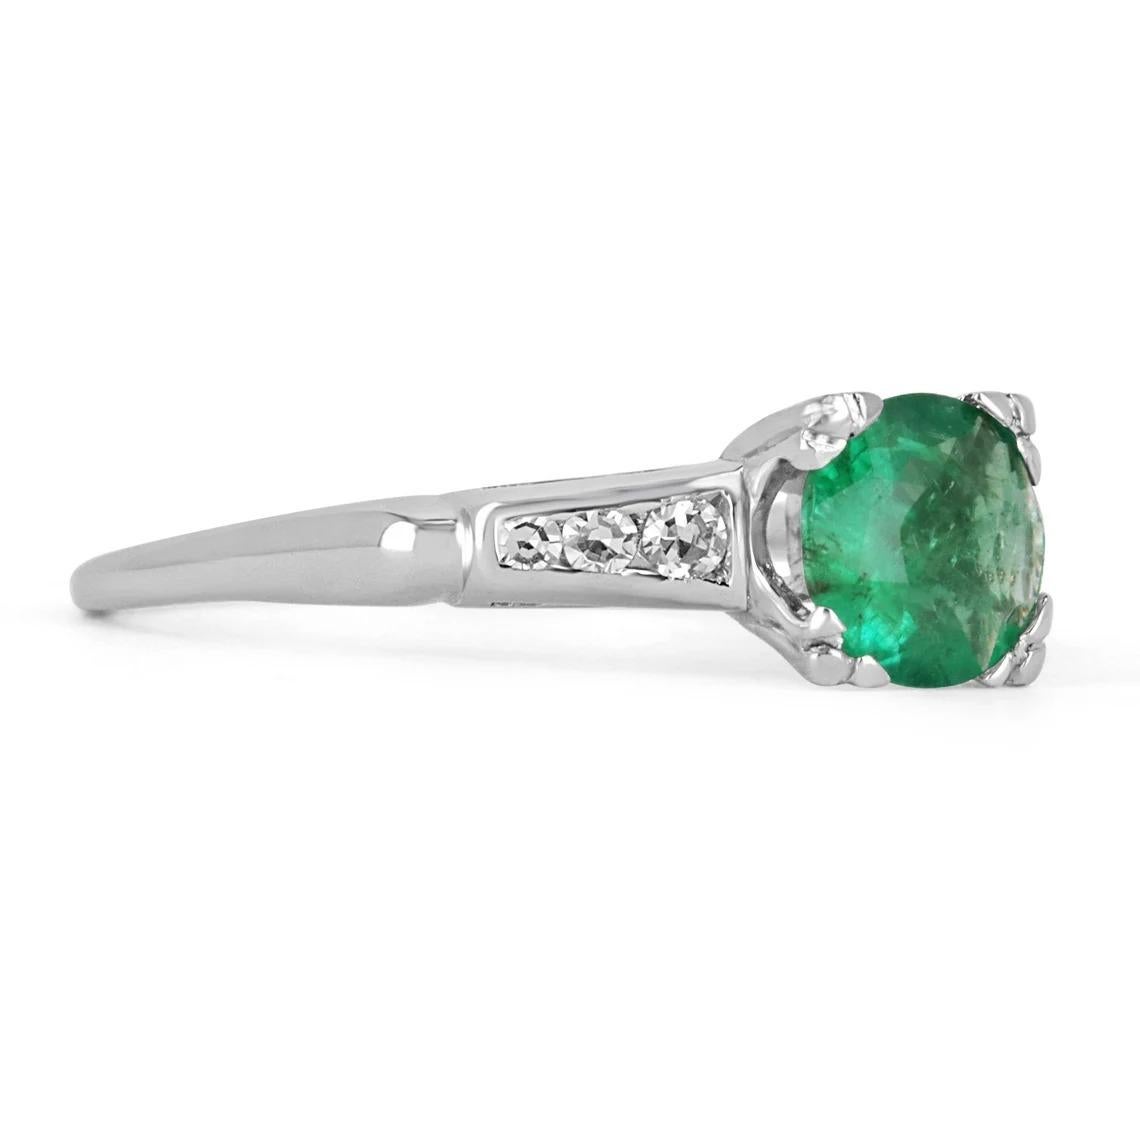 Featured here is this dainty emerald and diamond engagement/anniversary ring. The center stone holds almost a full carat of pure natural beauty. The stone displays a lovely shine and green color, as well as very good eye clarity. Accented on both